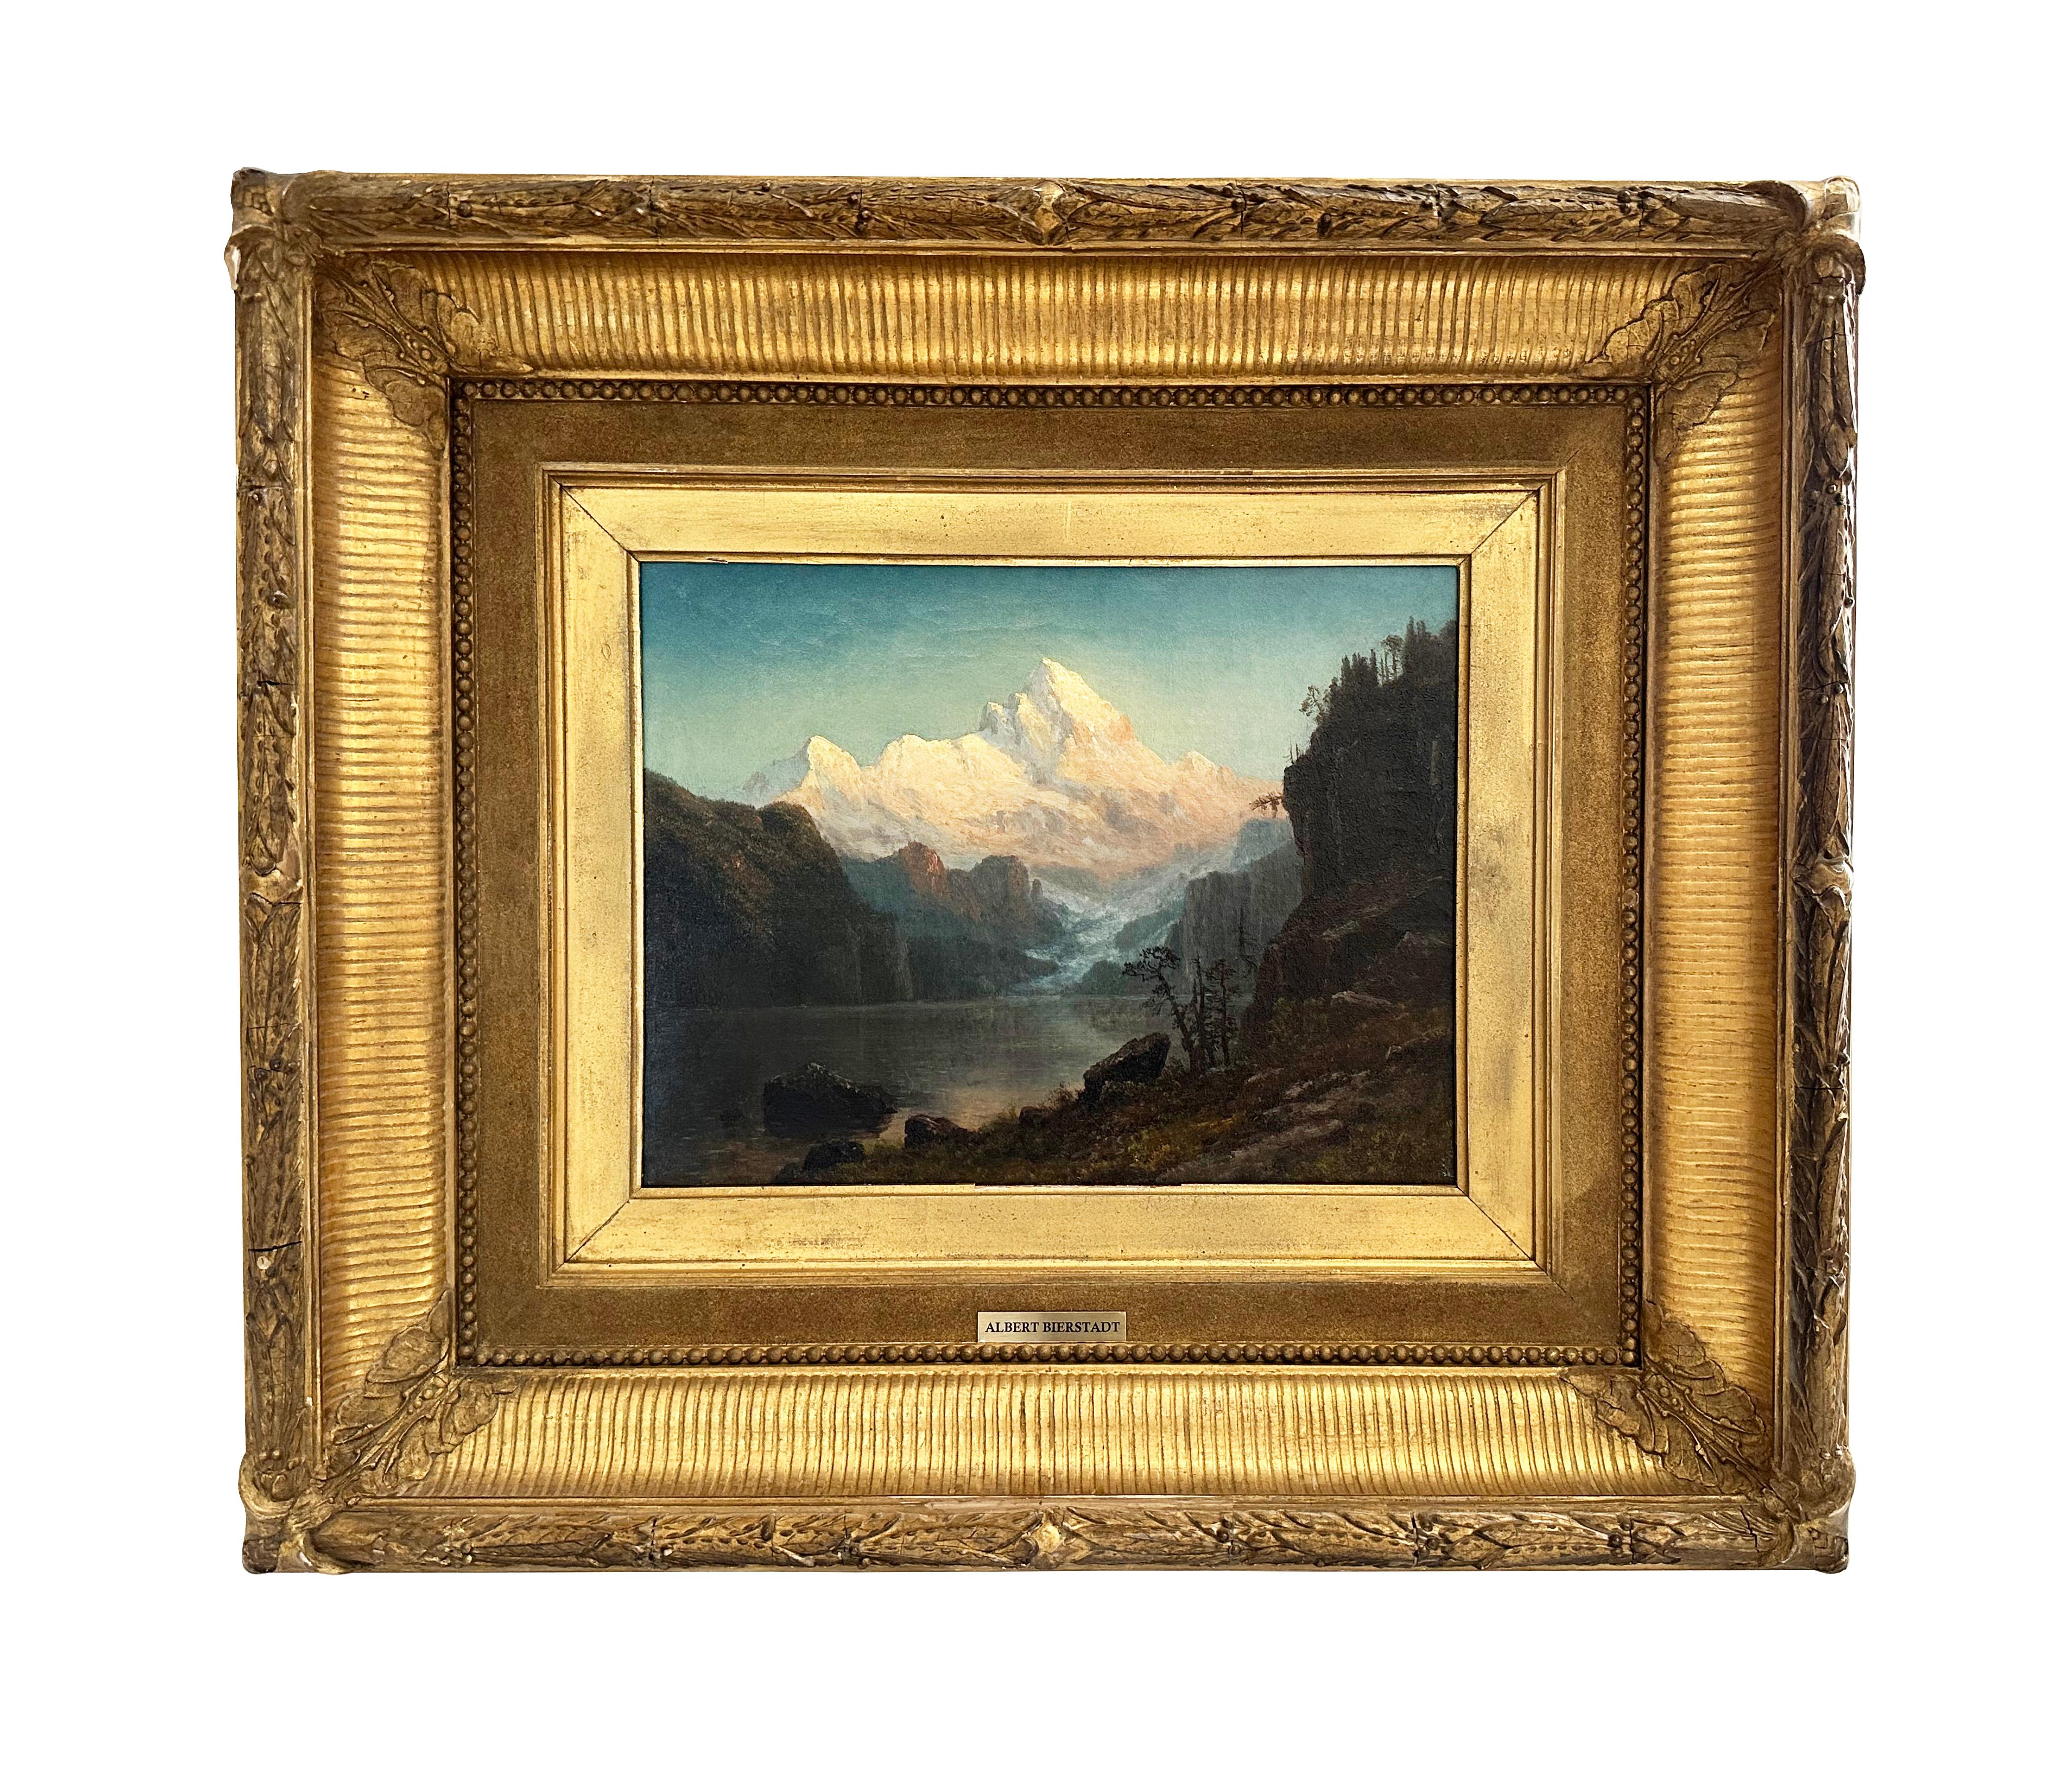 Albert Bierstadt Landscape Painting - "In the Canadian Rockies" 19th Century Oil Painting on Canvas